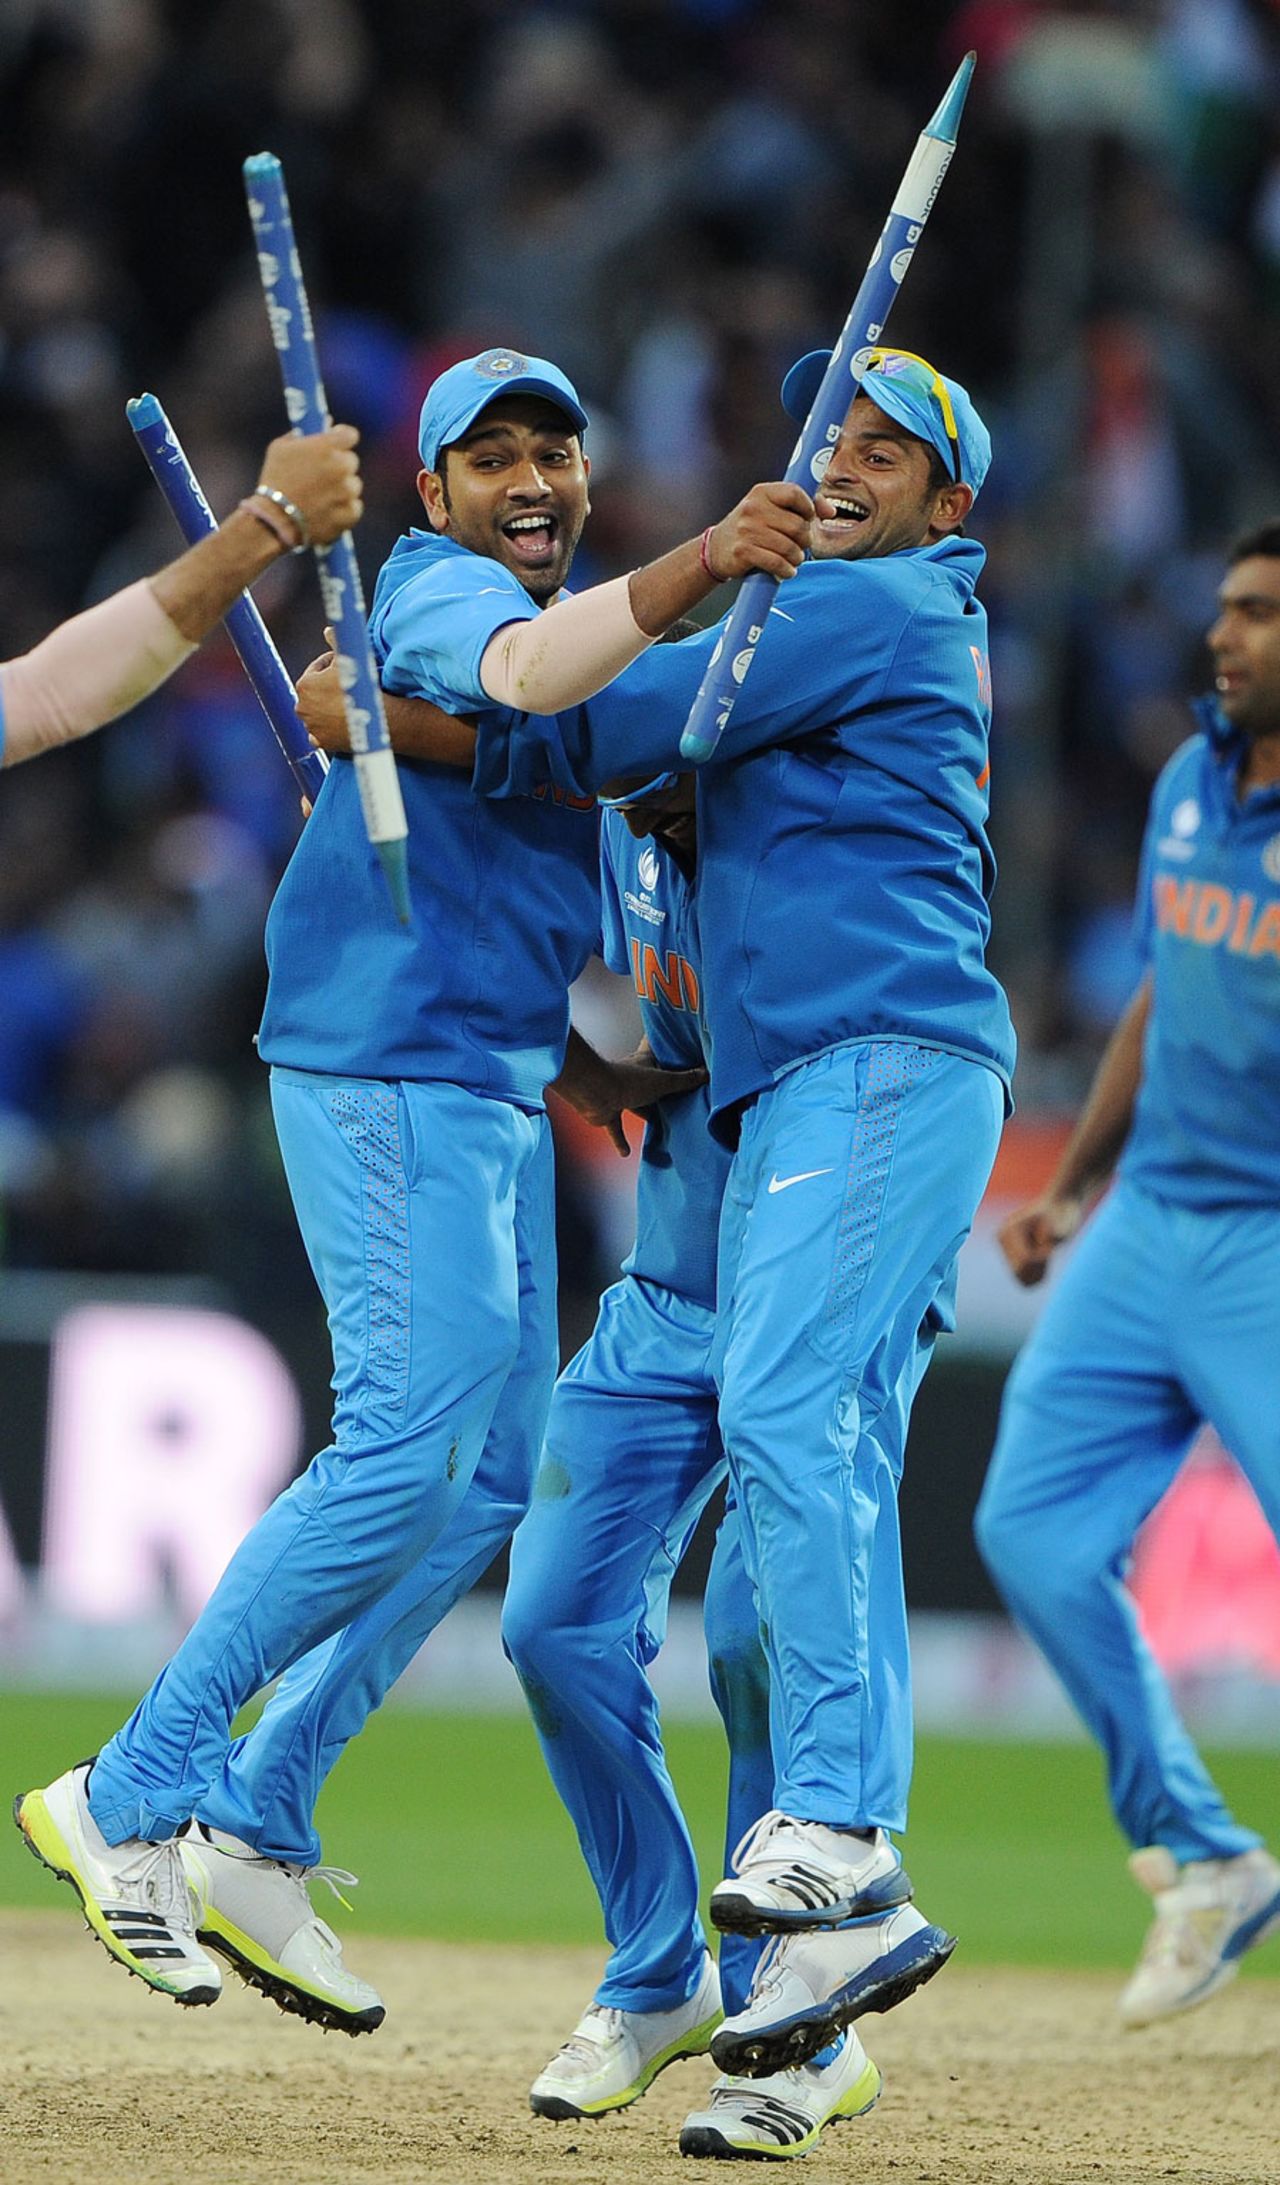 Rohit Sharma and Suresh Raina embrace after India won the Champions Trophy, England v India, Champions Trophy final, Edgbaston, June 23, 2013